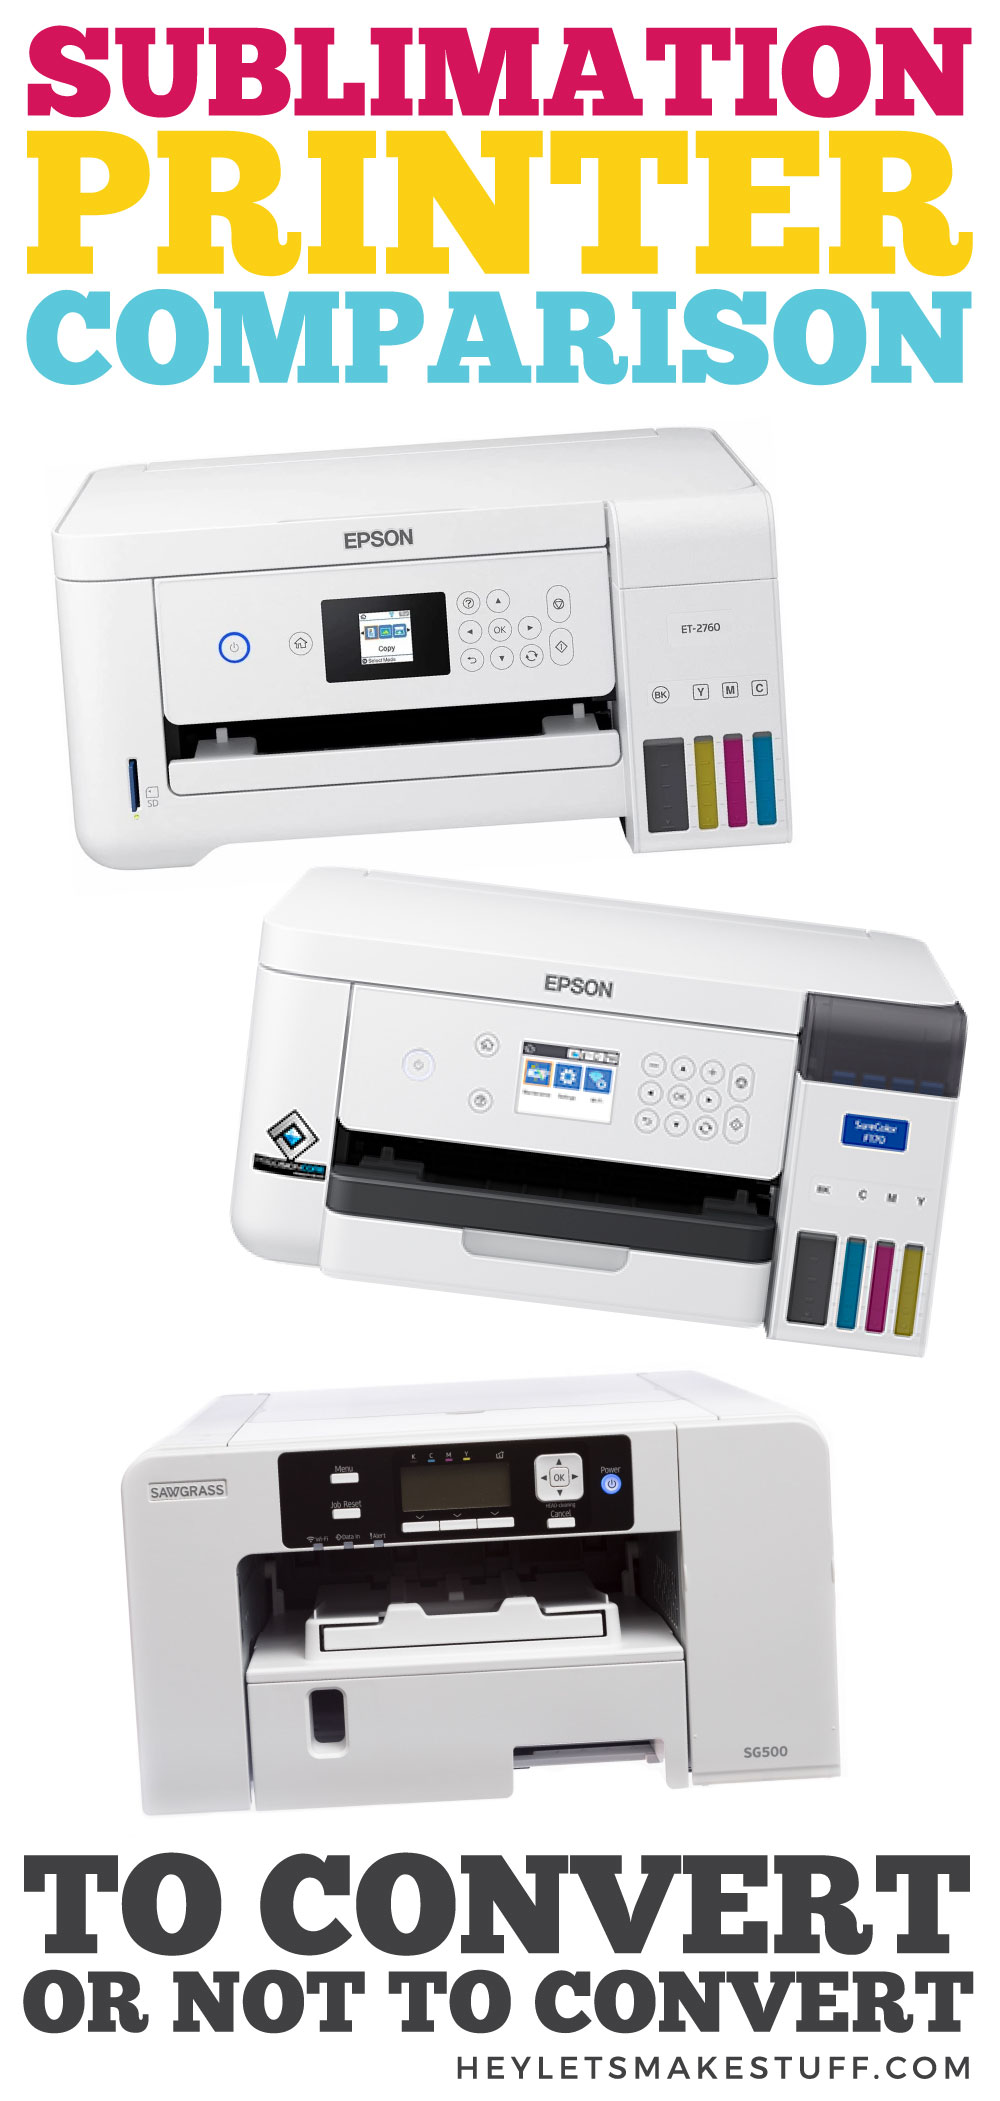 Sublimation Printer Comparison To Convert or Not to Convert?